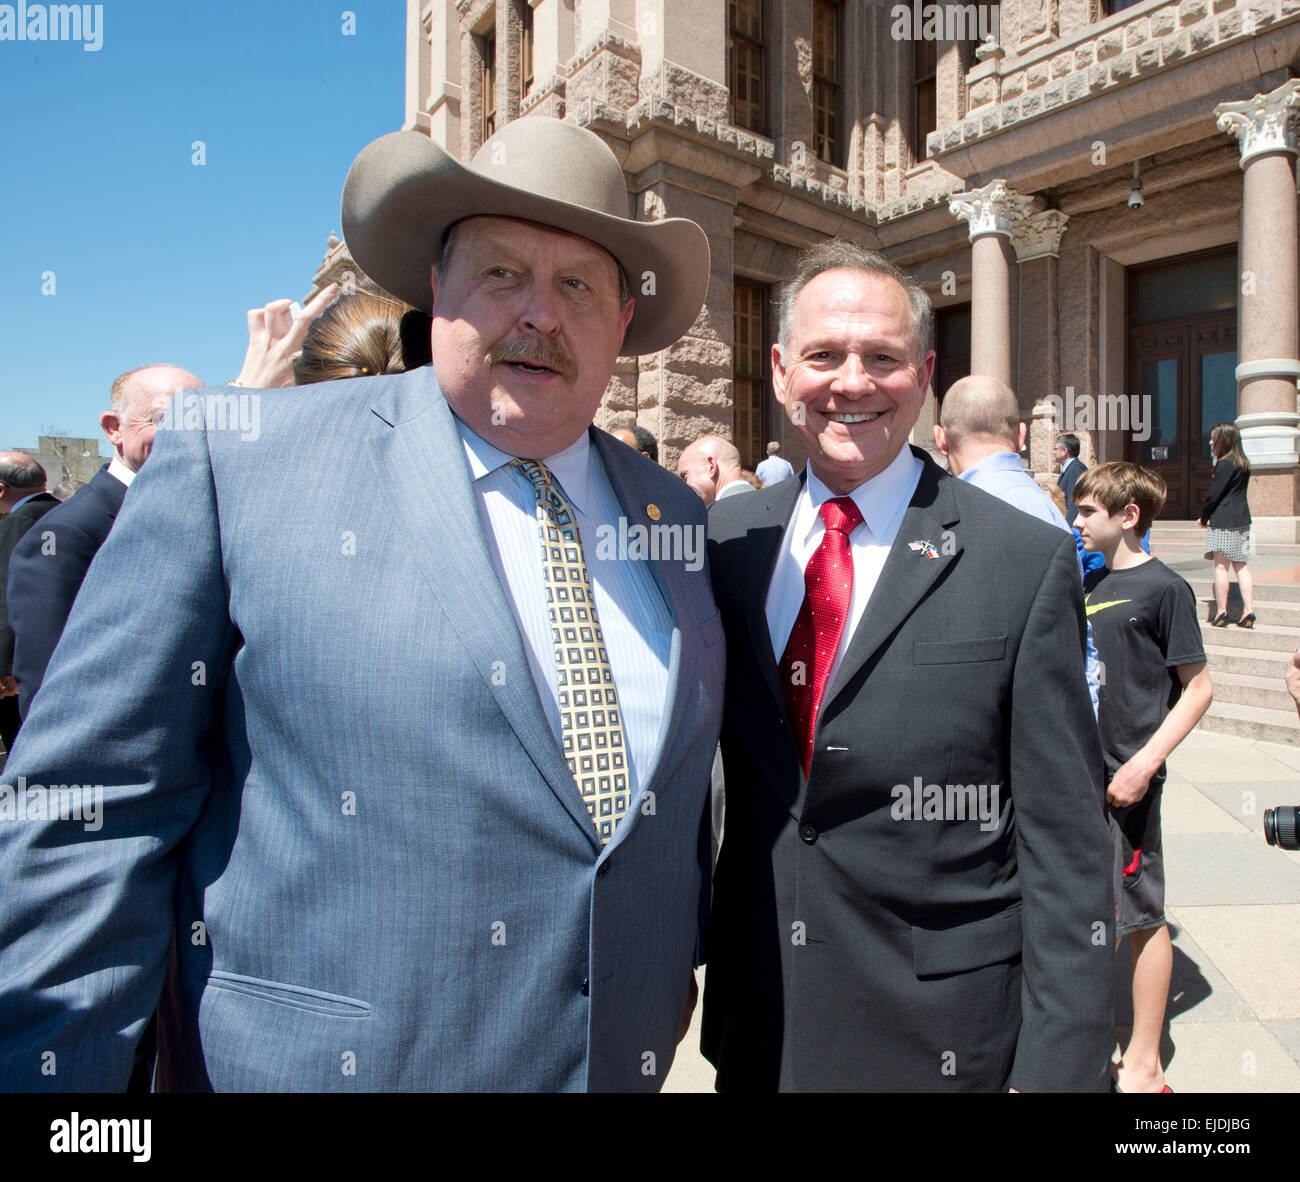 Austin, Texas, USA. 23rd March, 2015. Controversial  Alabama Supreme Court Chief Justice Roy Moore, r, poses with Texas Rep. Cecil Bell, Jr. at a rally of conservative Texas legislators opposing gay marriage at a Texas Capitol rally Monday.  Moore has told Alabama judges to ignore a recent federal court ruling allowing gay marriage in the state. Credit:  Bob Daemmrich/Alamy Live News Stock Photo